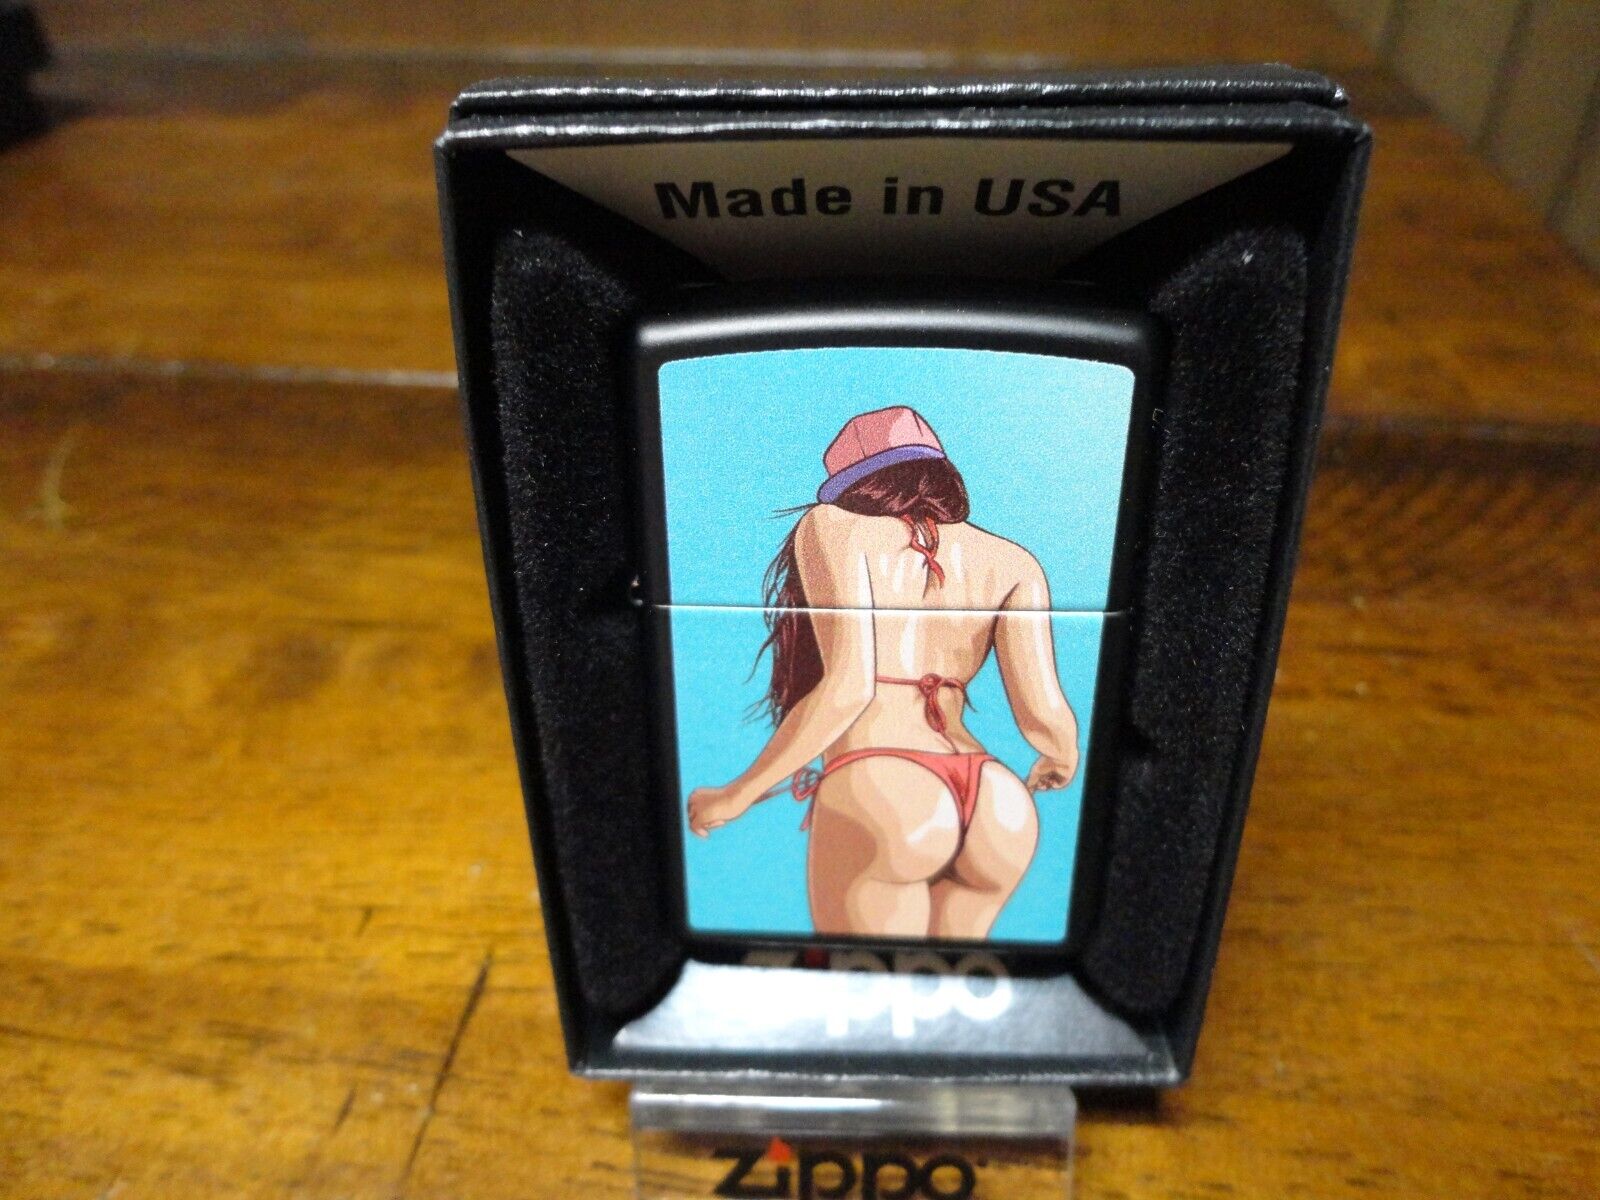 VIEW FROM BEHIND IN THONG BASEBALL CAP PINUP GIRL ZIPPO LIGHTER MINT IN BOX